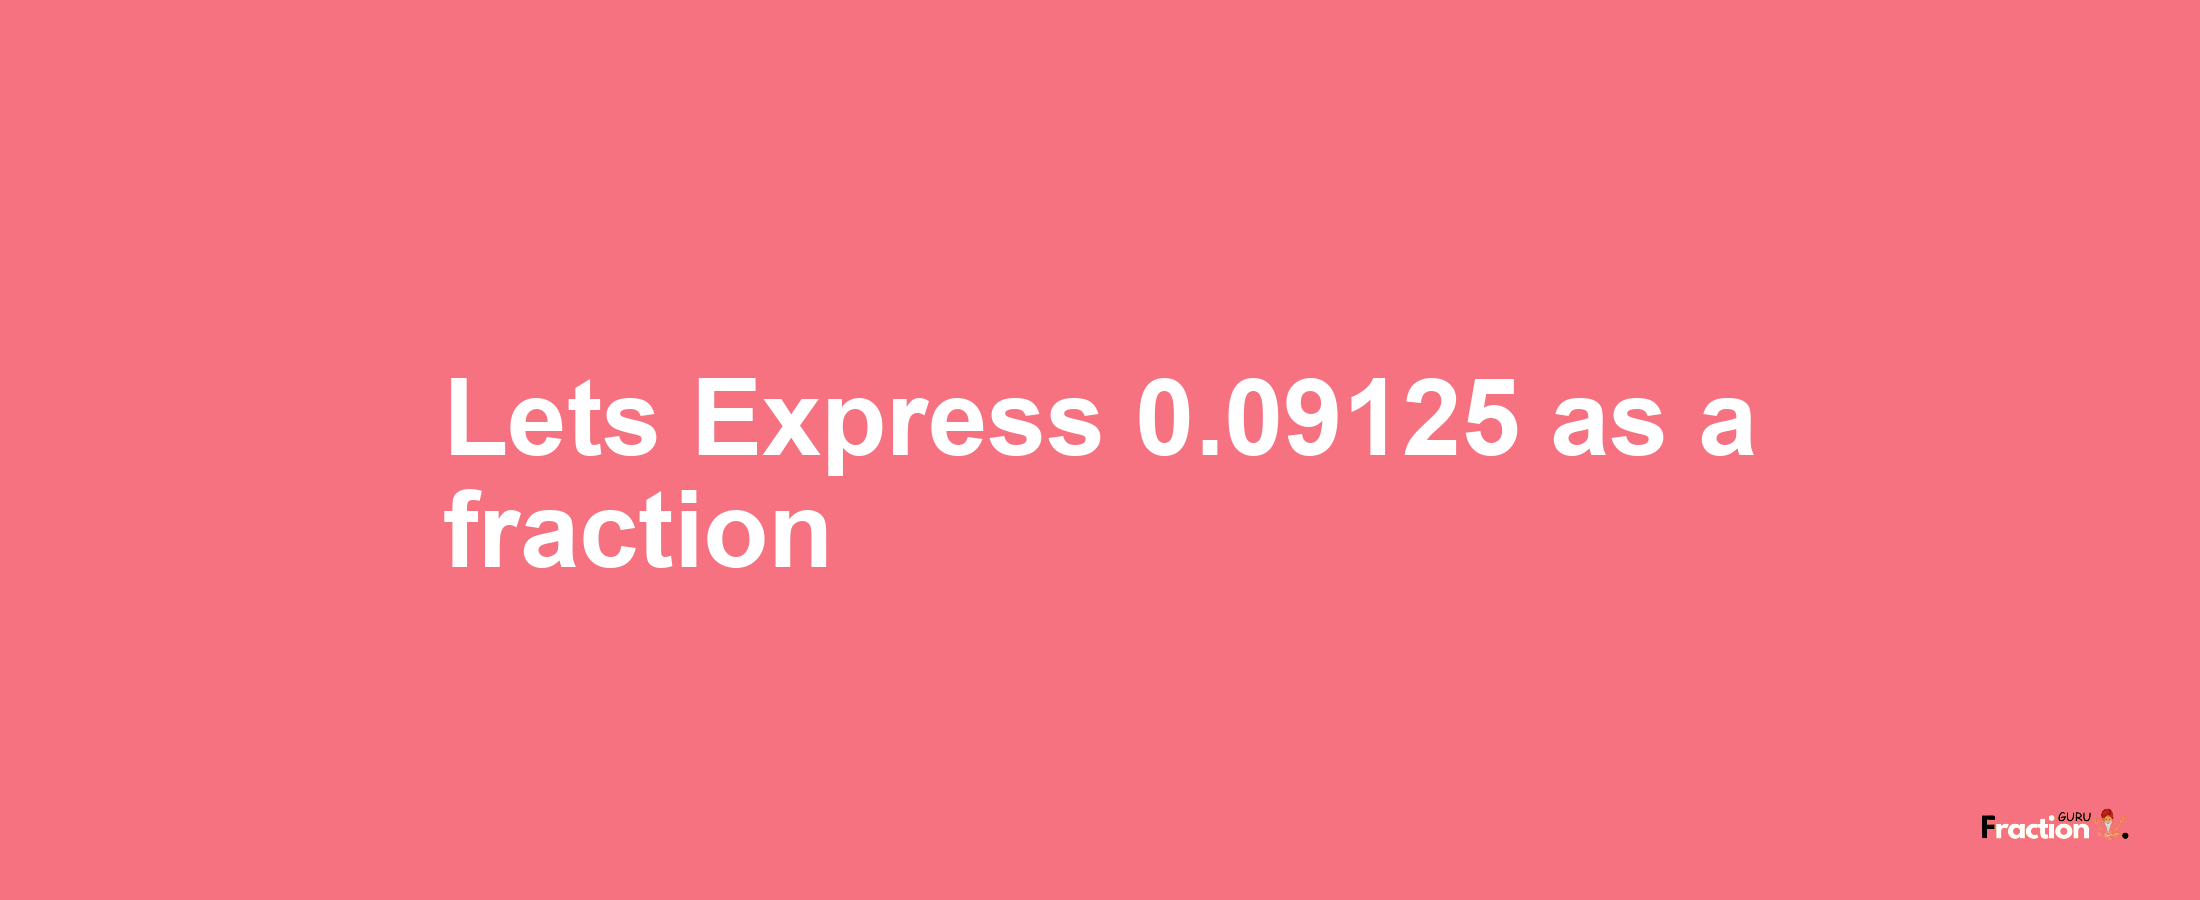 Lets Express 0.09125 as afraction